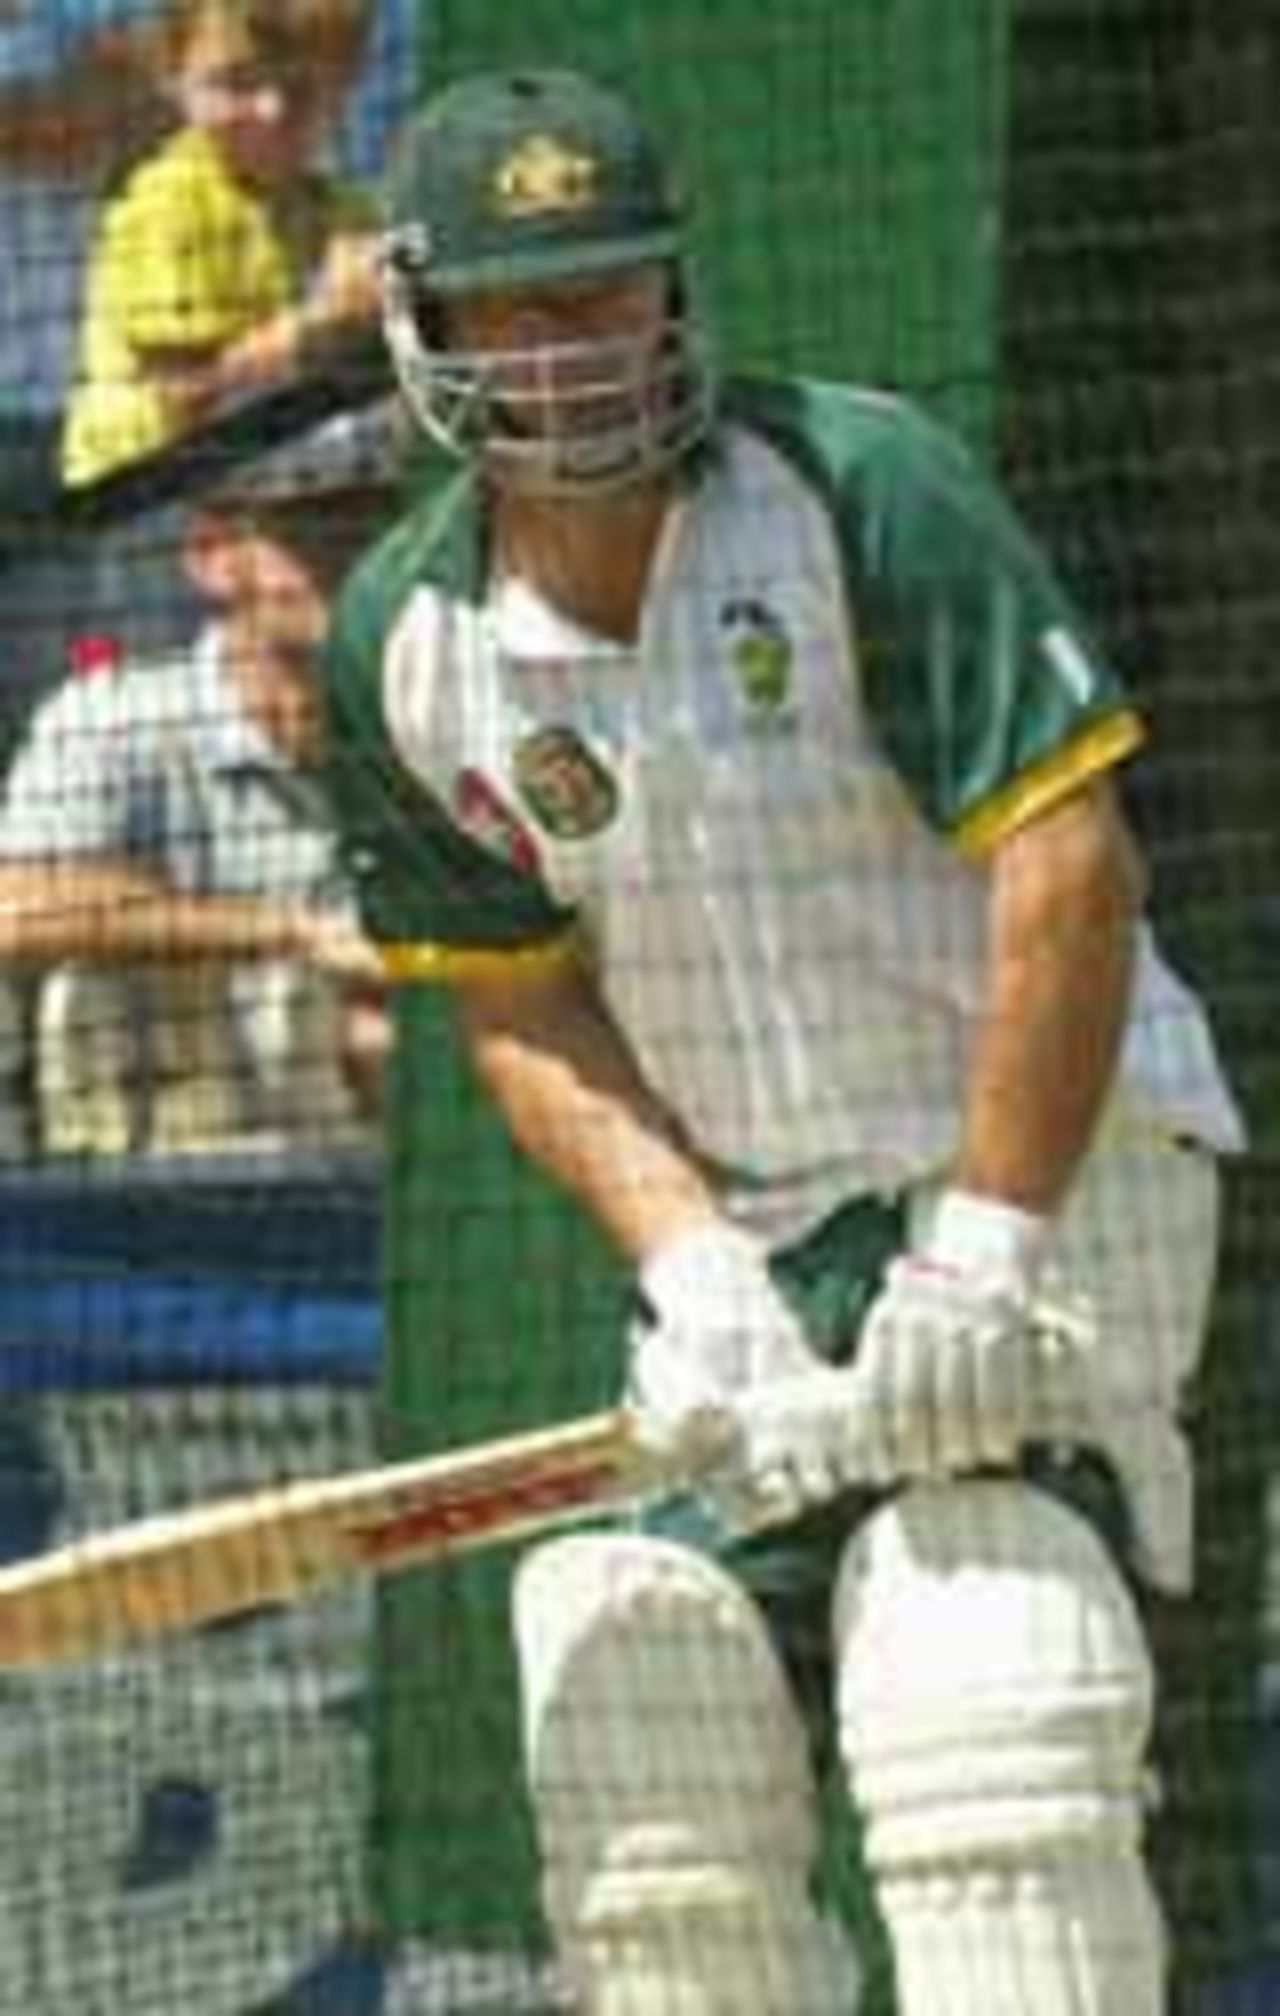 Steve Waugh at nets a day before the final Test, 1st January 2004, 4th Test, Sydney